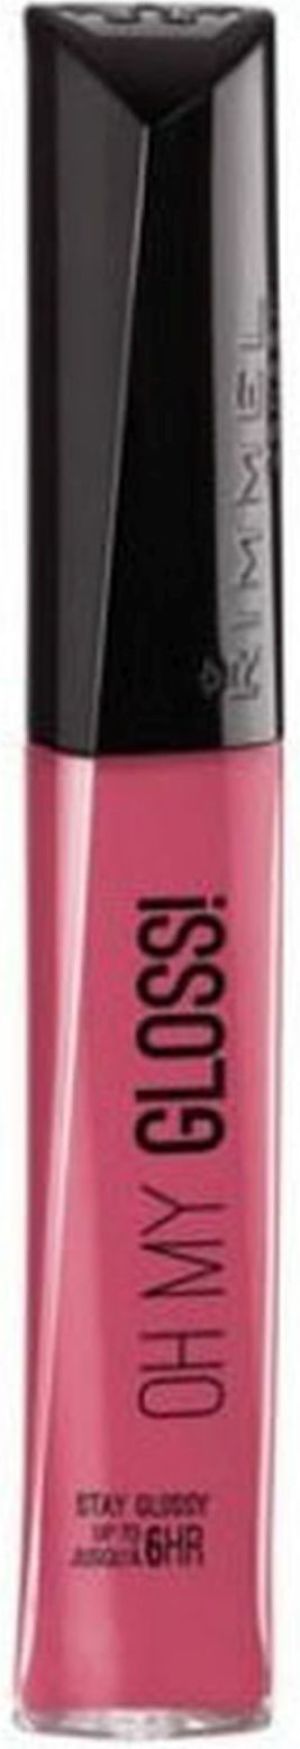 Rimmel  Stay Glossy Oh My Lipgloss 400 Pretty In Pink 6.5ml 1